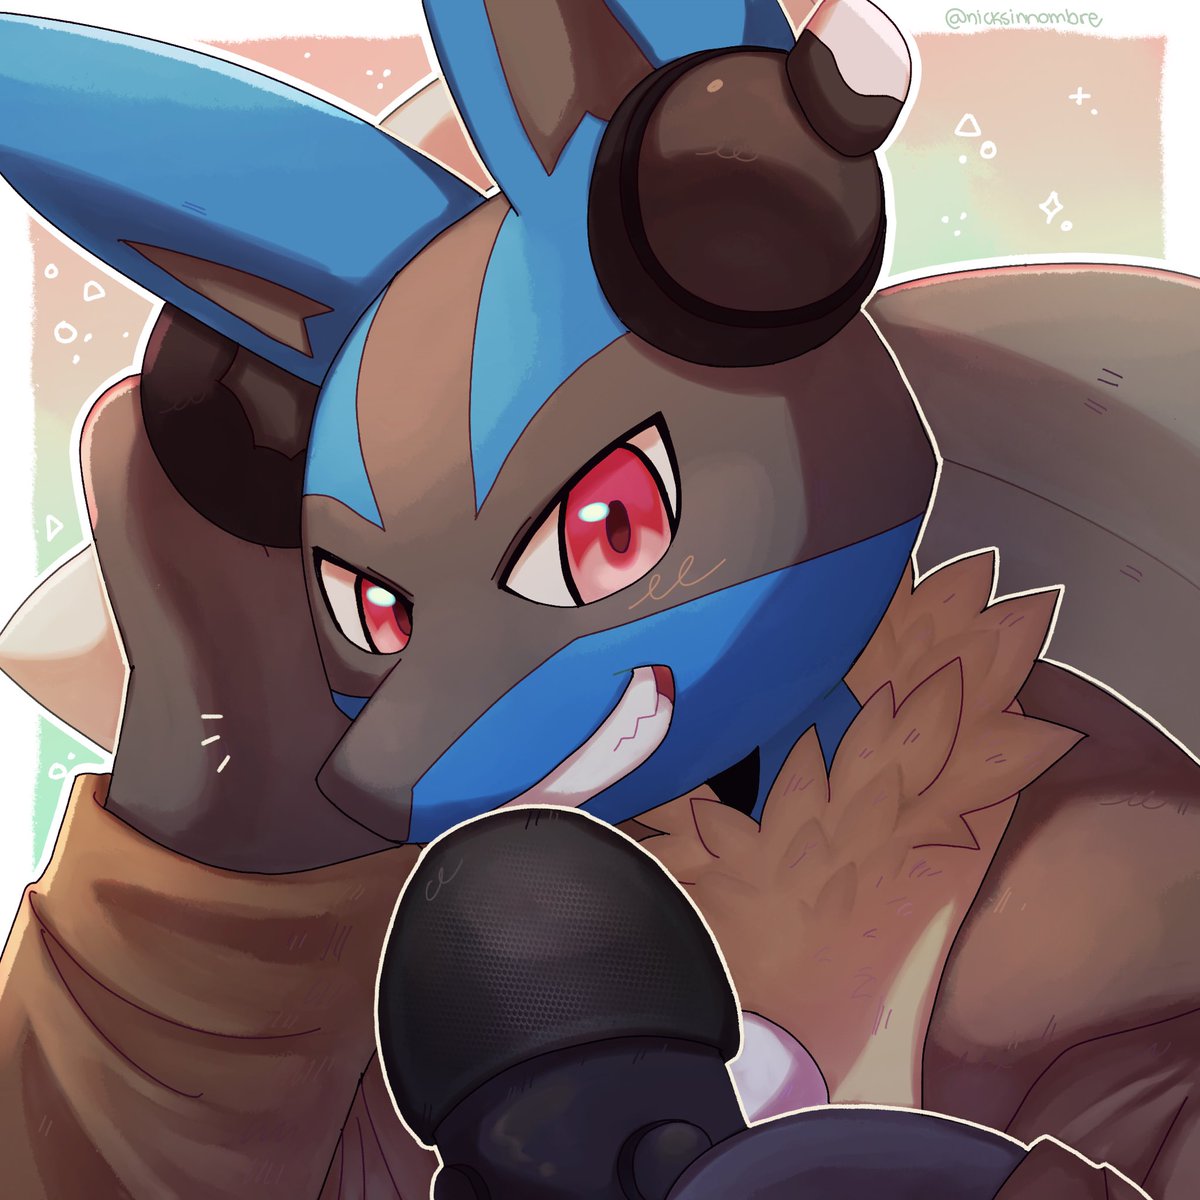 Got a sweet commission of my Lucario sona preparing for his gaming stream! Was time to get a new streaming icon. Thanks again for the art @Nicksinnombre! ^^